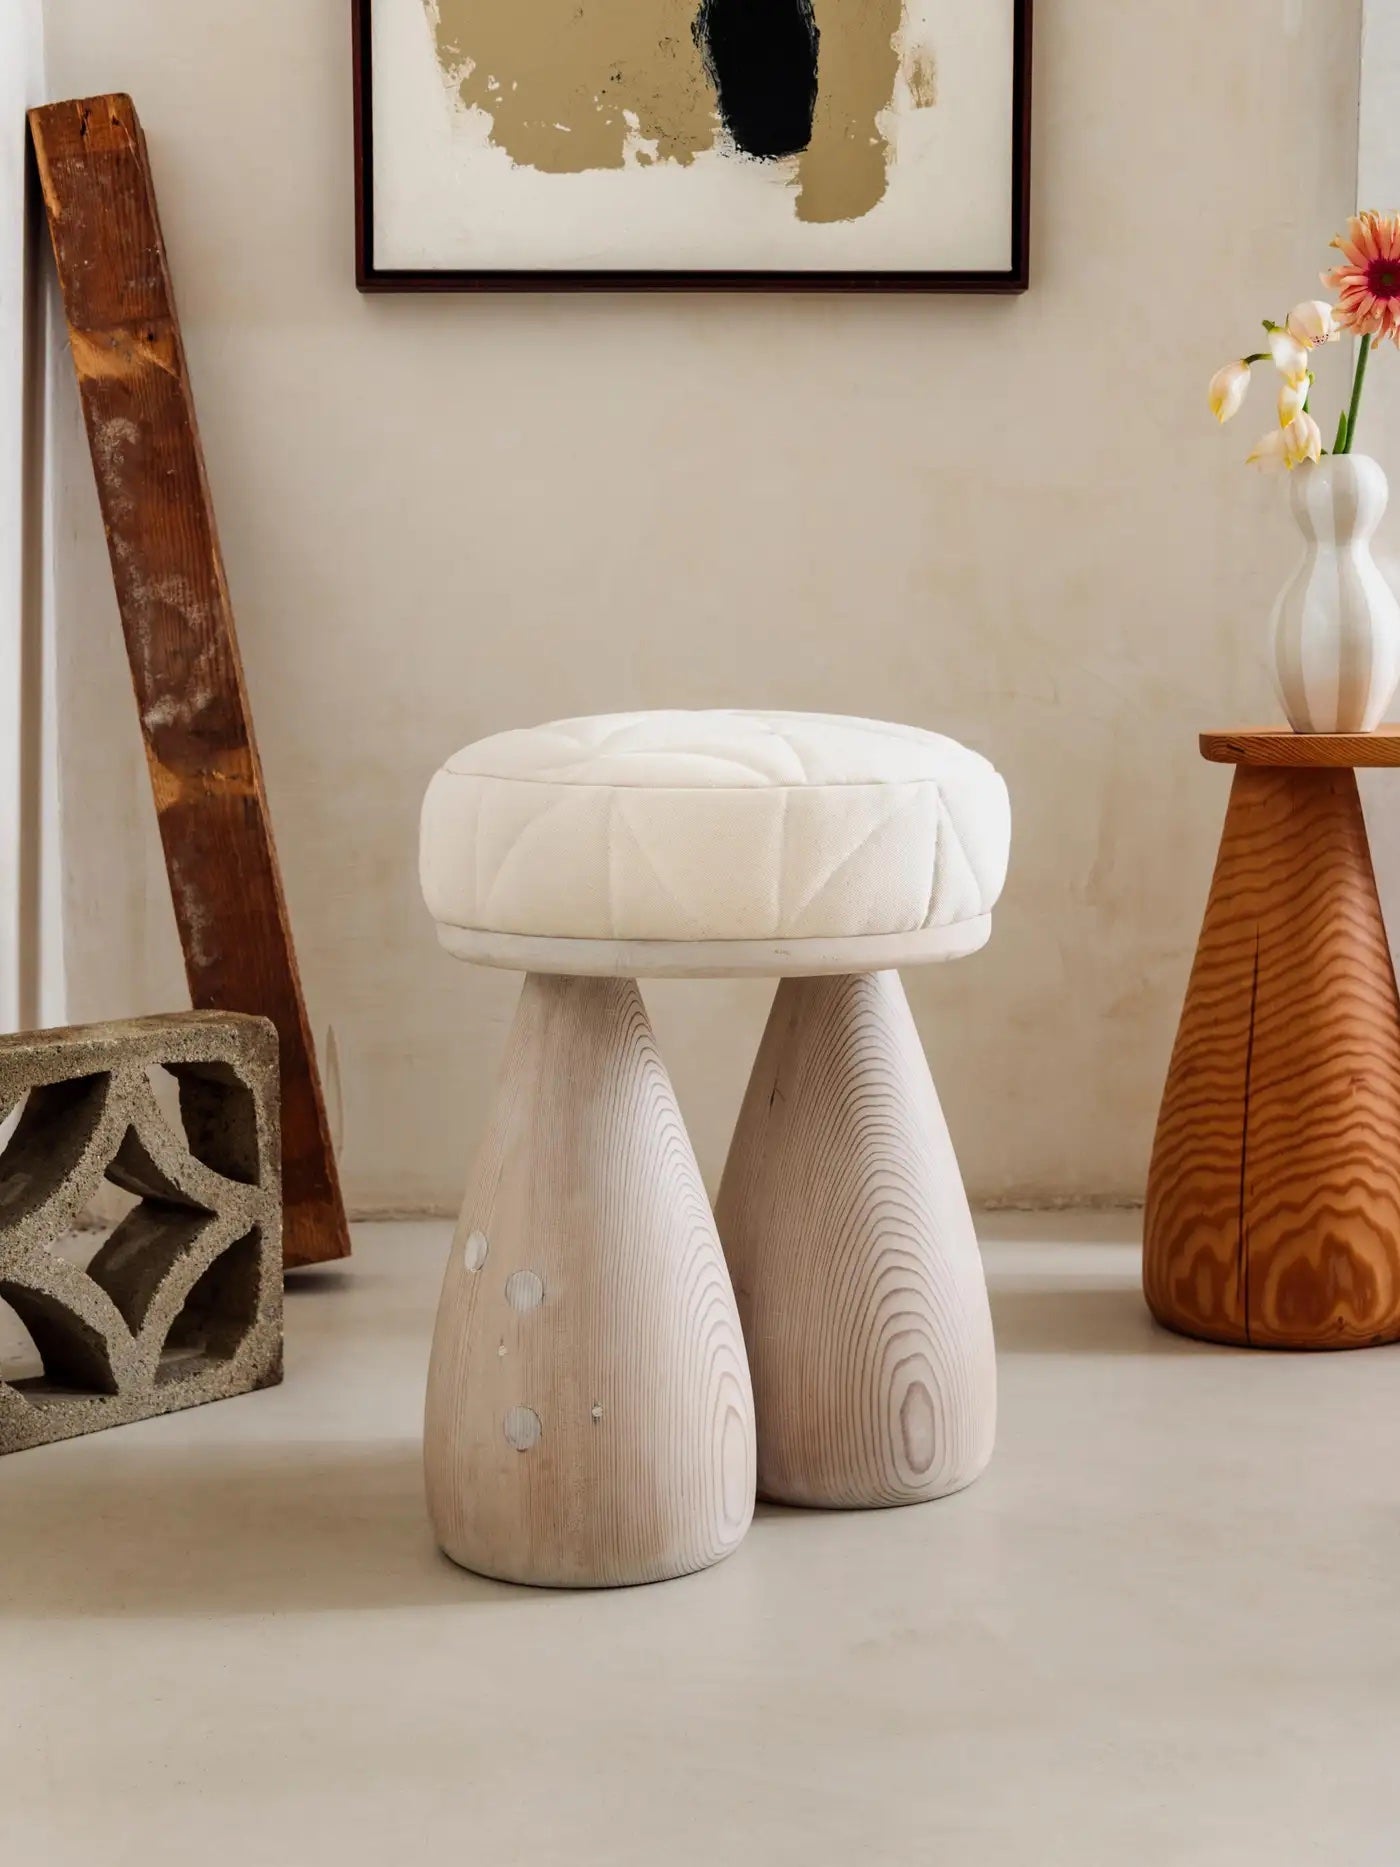 This Chubby-Chic Quilted Stool Stands on Its Own Two Feet